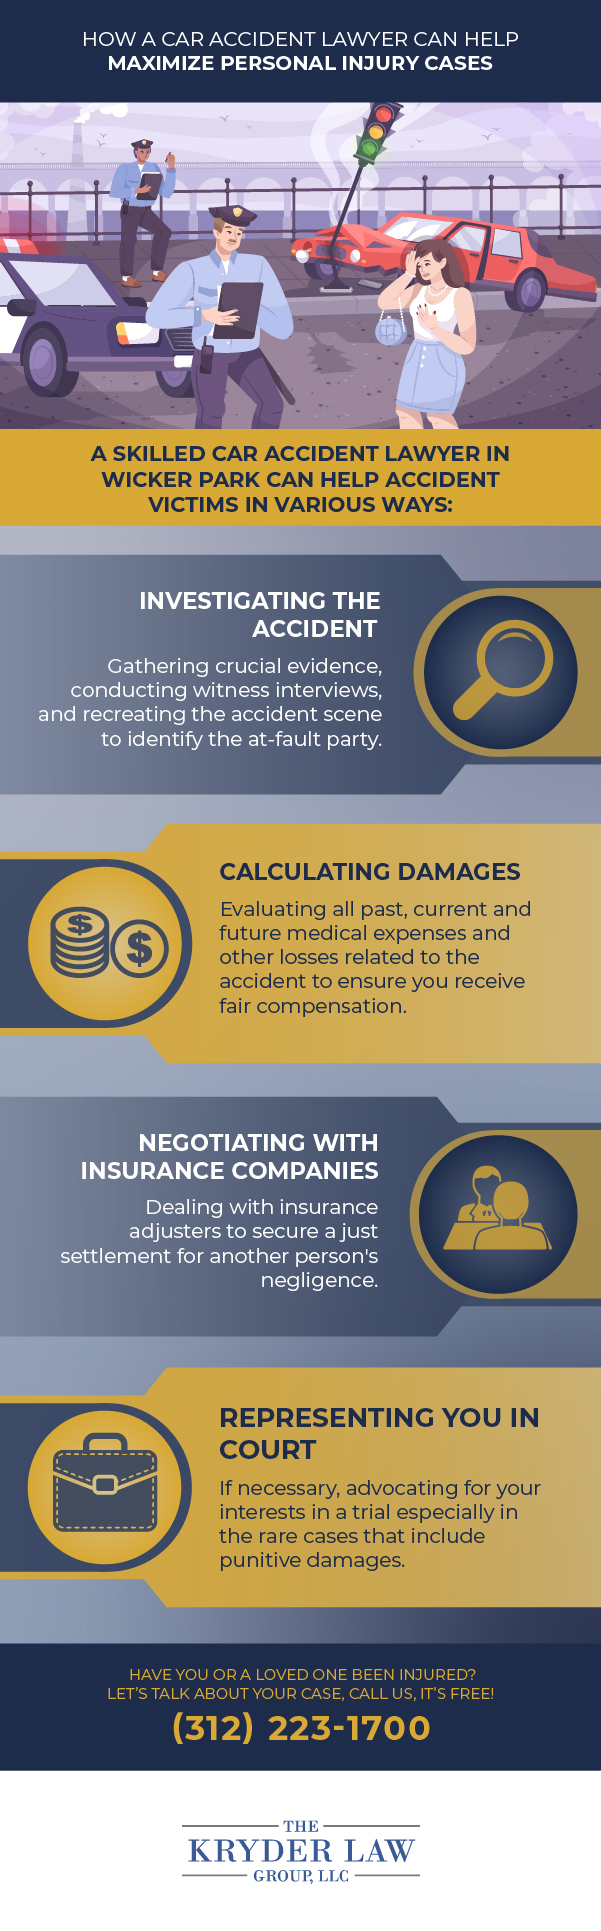 How a Car Accident Lawyer Can Help Maximize Personal Injury Cases